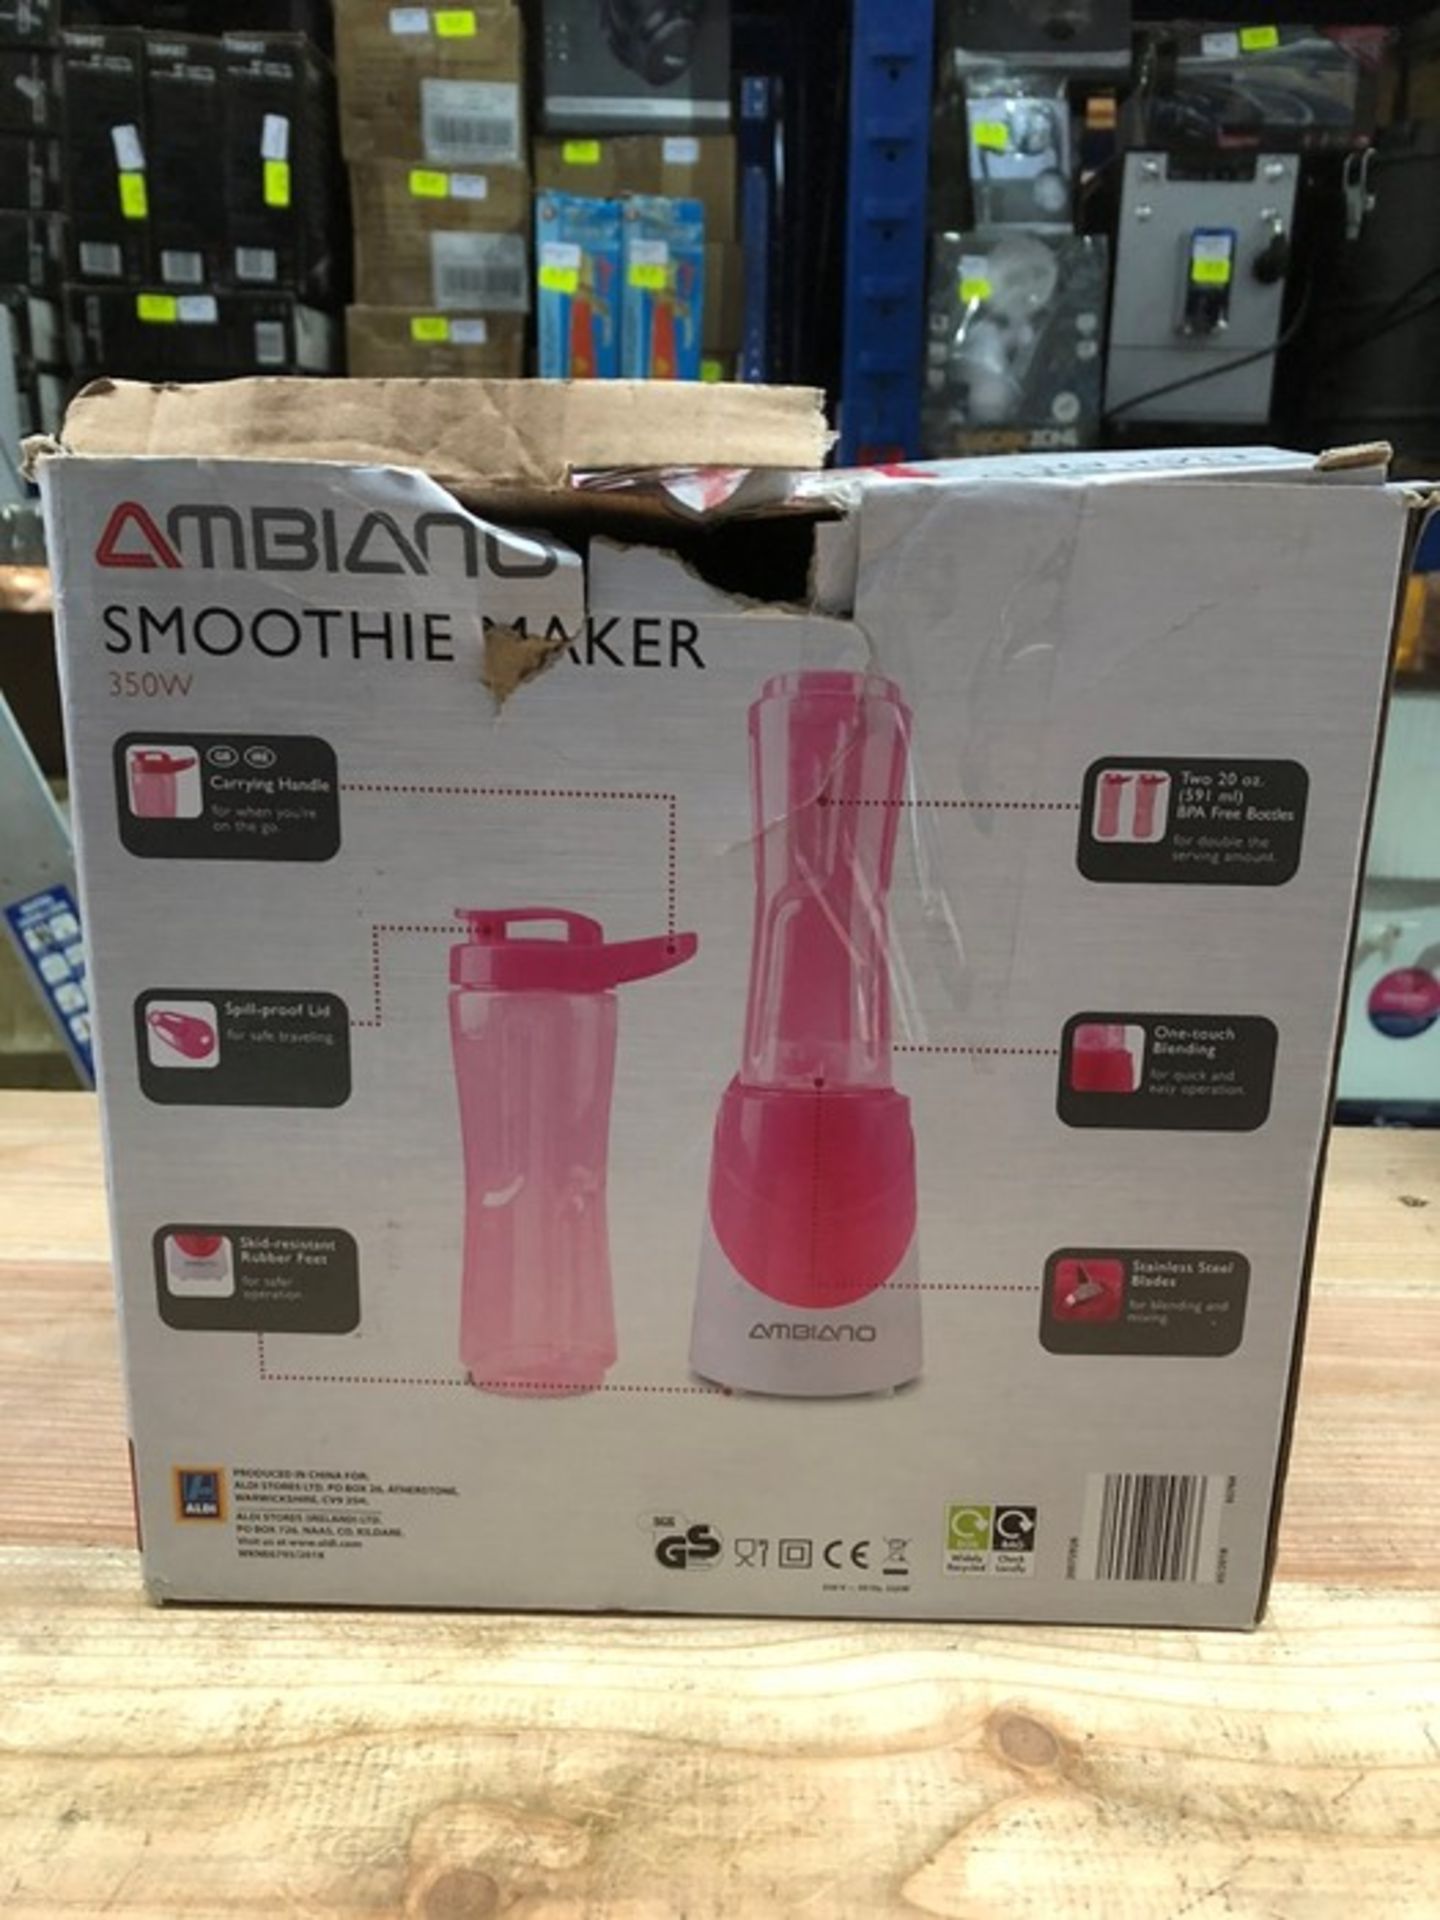 1 BOXED AMBIANO SMOOTHIE MAKER IN PINK / RRP £14.99 (PUBLIC VIEWING AVAILABLE)